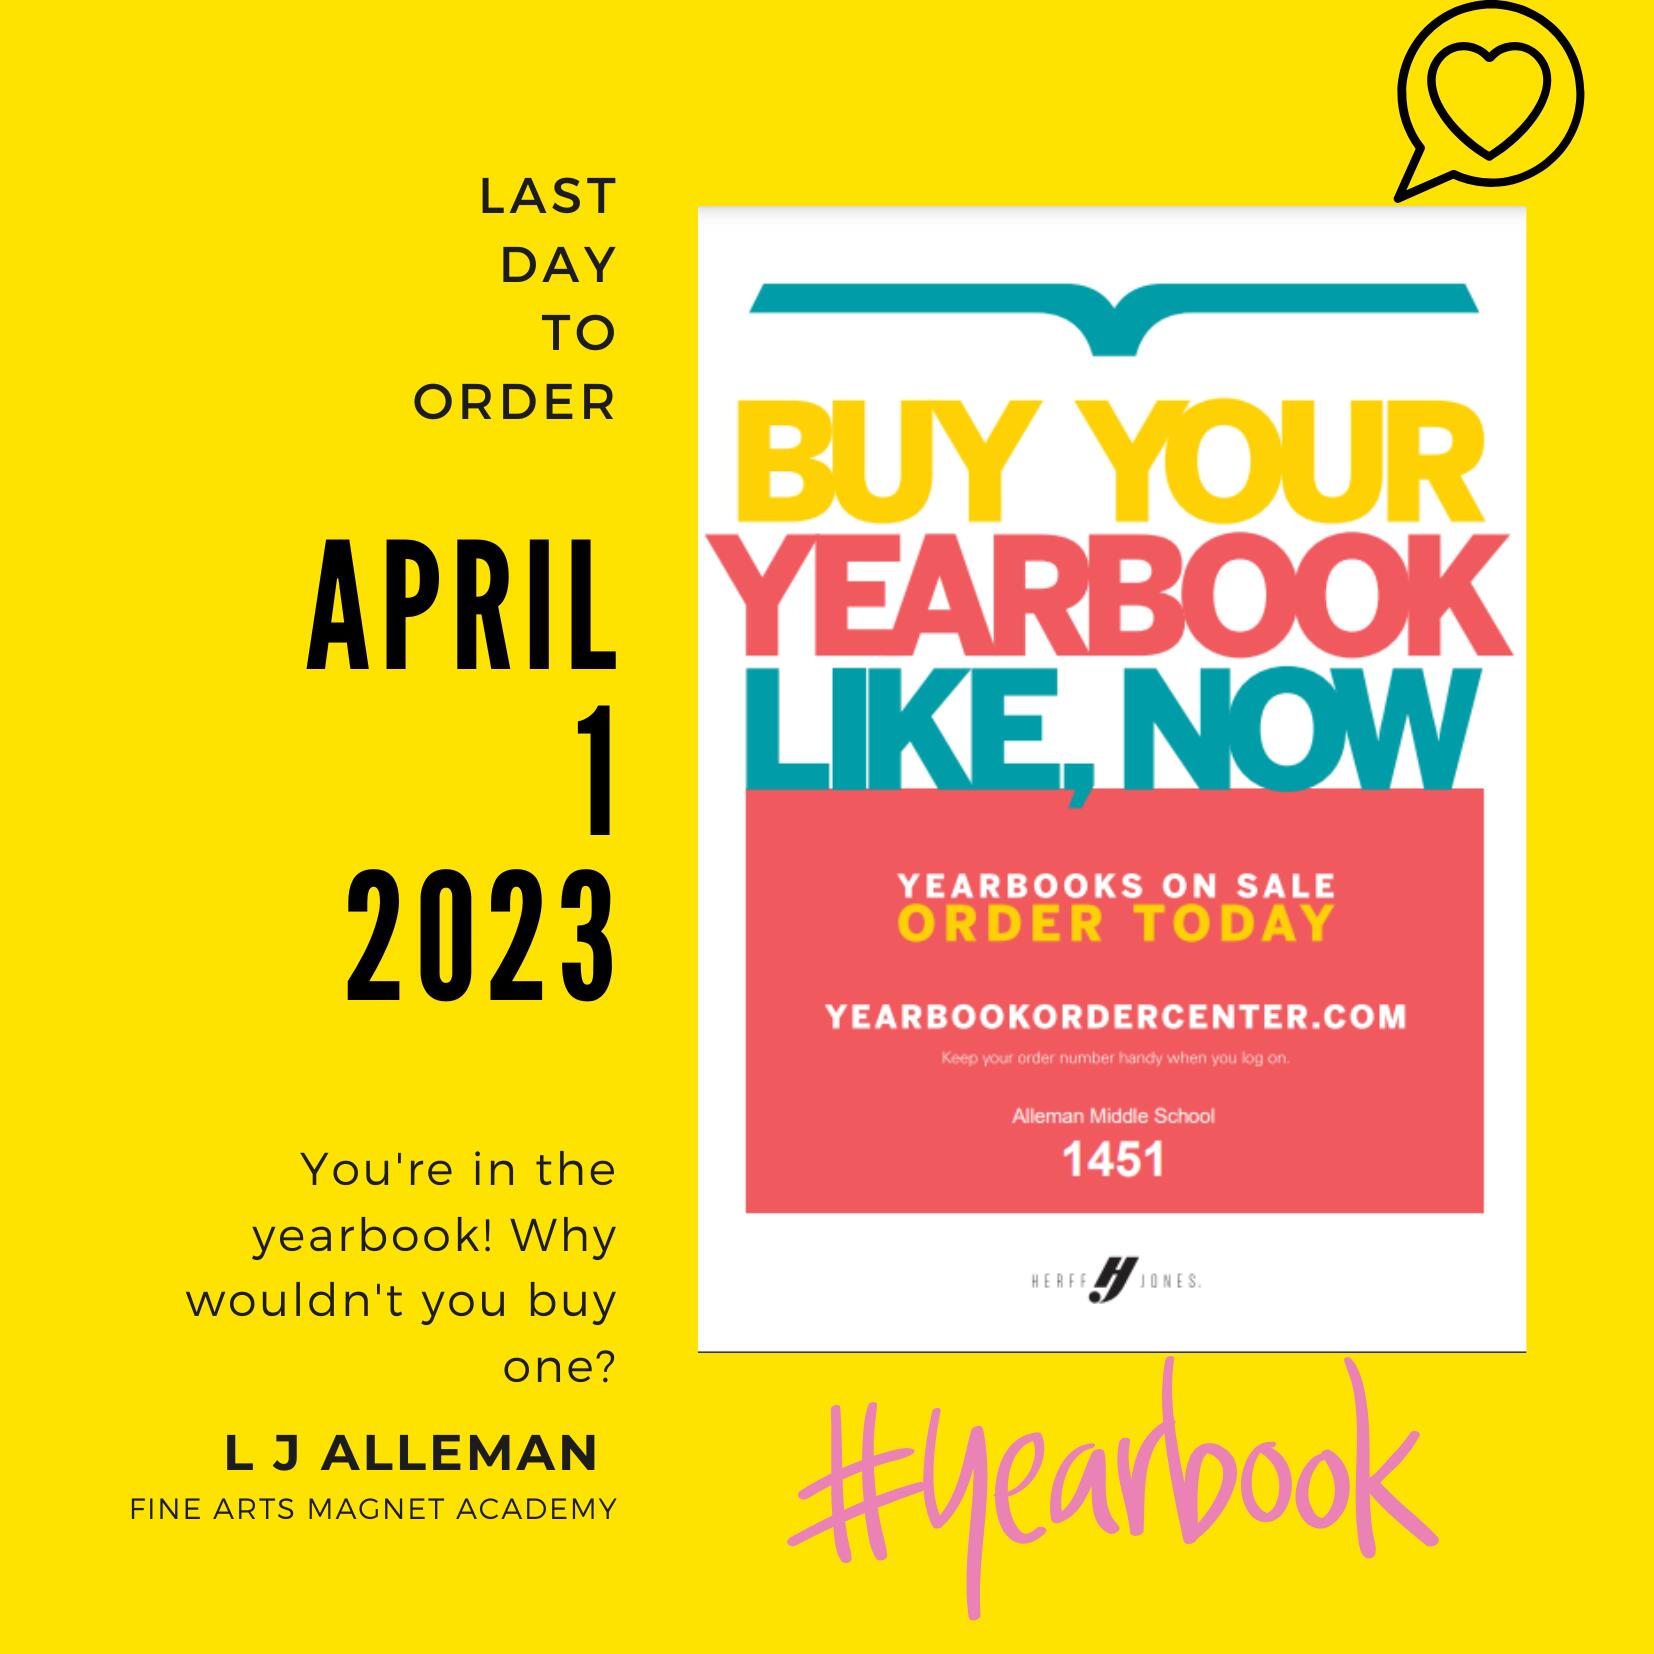 Last Day to order yearbooks April 1, 2023